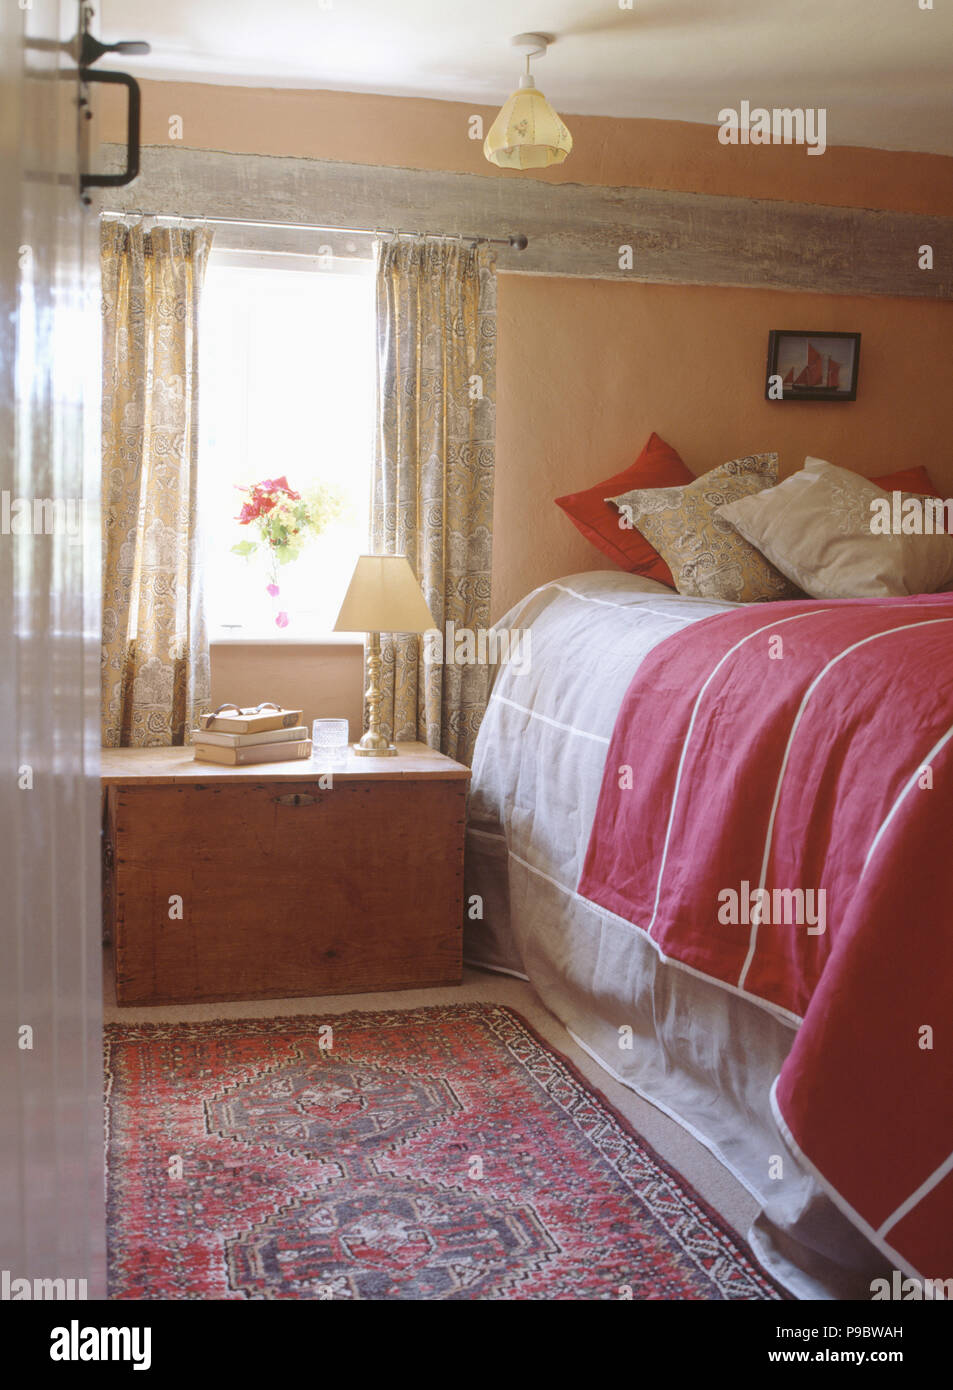 Wooden chest below window in cottage bedroom with cushions and red throw on the bed Stock Photo